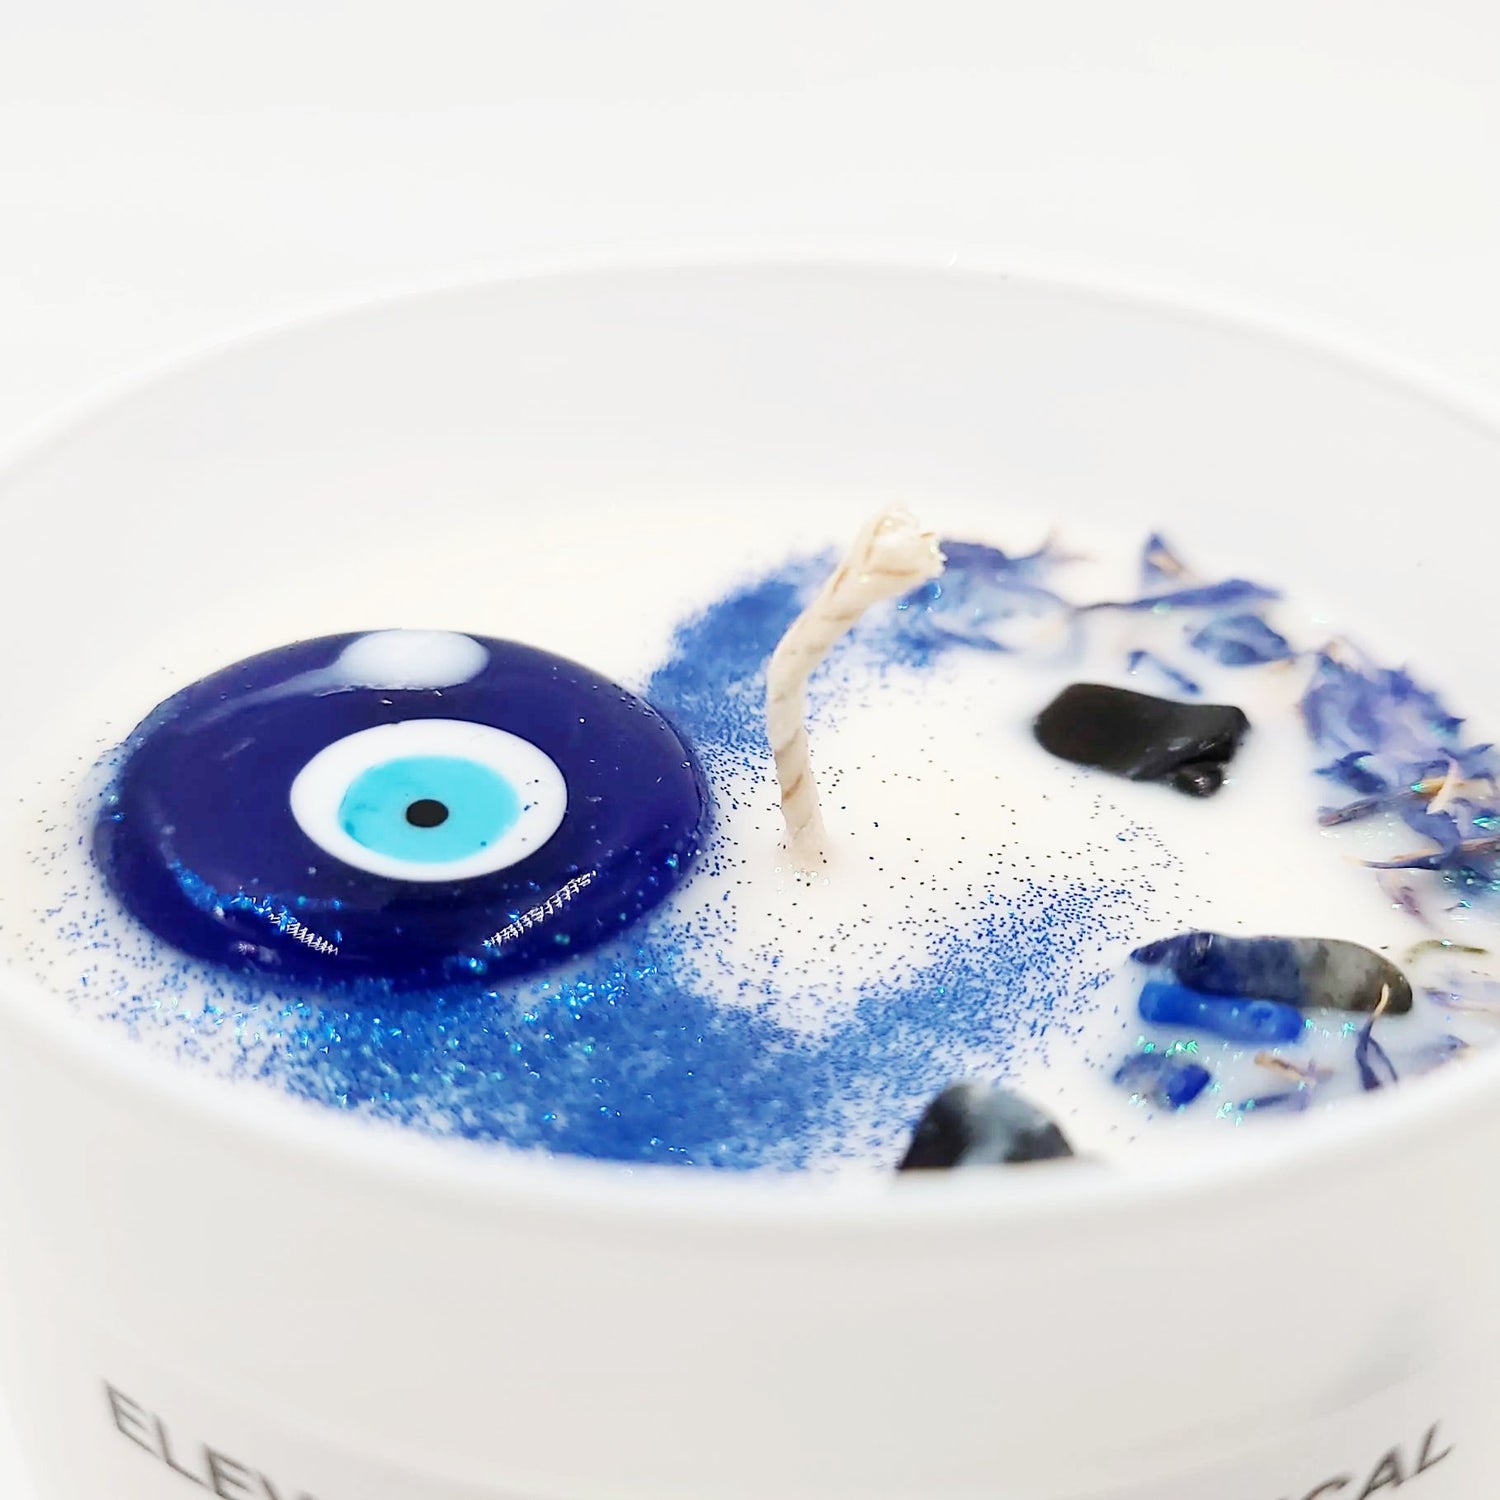 Evil Eye Crystal Candle Egyptian Amber Scented 11oz 310g - Candle - Elevated Metaphysical